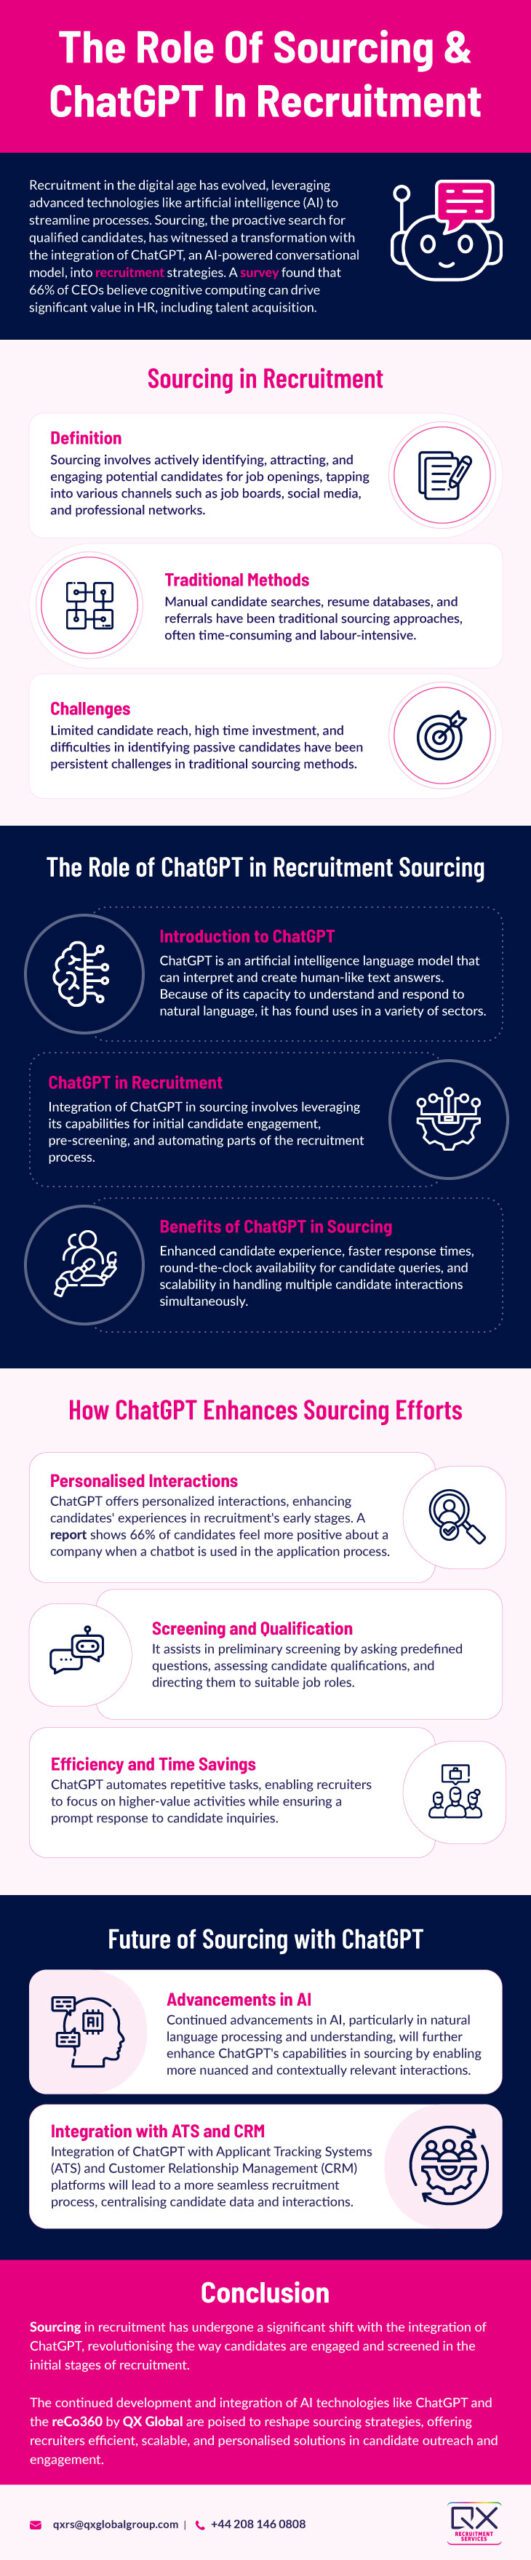 The Role Of Sourcing & ChatGPT In Recruitment 